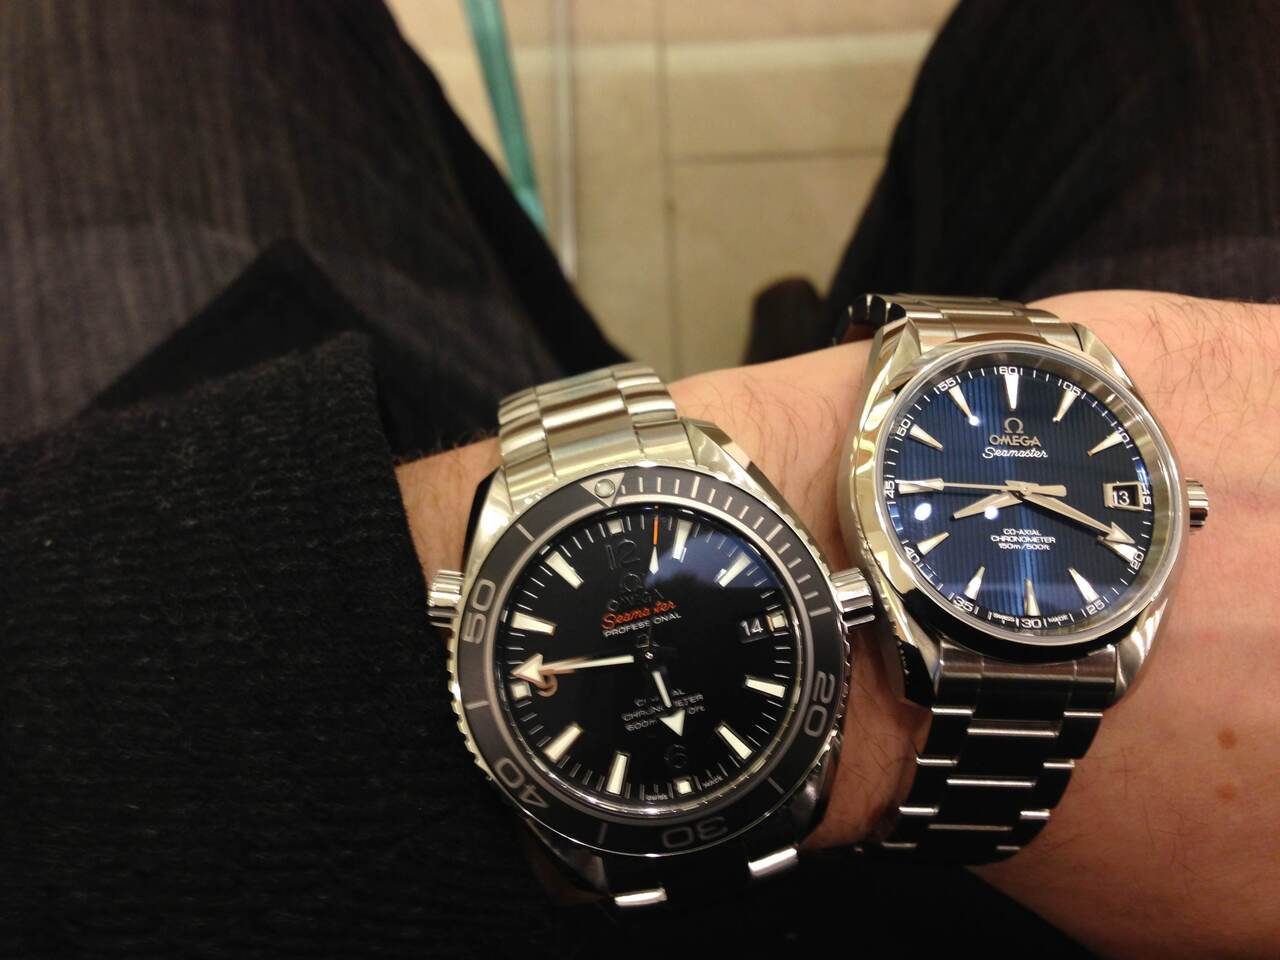 fall-wanted-share-my-first-omega-purchase-photo-1-.jpg